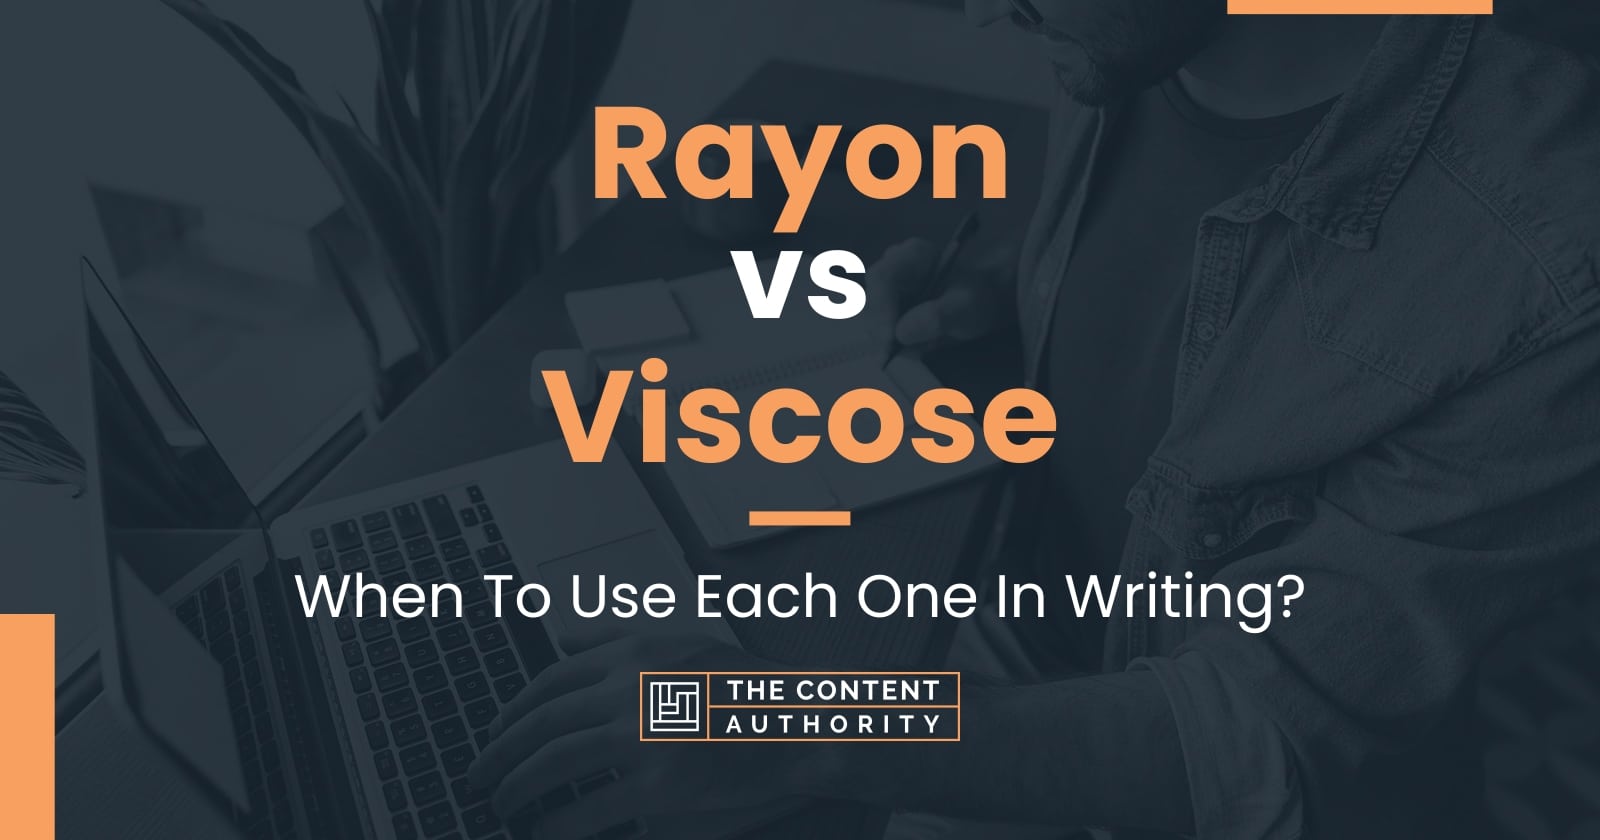 rayon-vs-viscose-when-to-use-each-one-in-writing